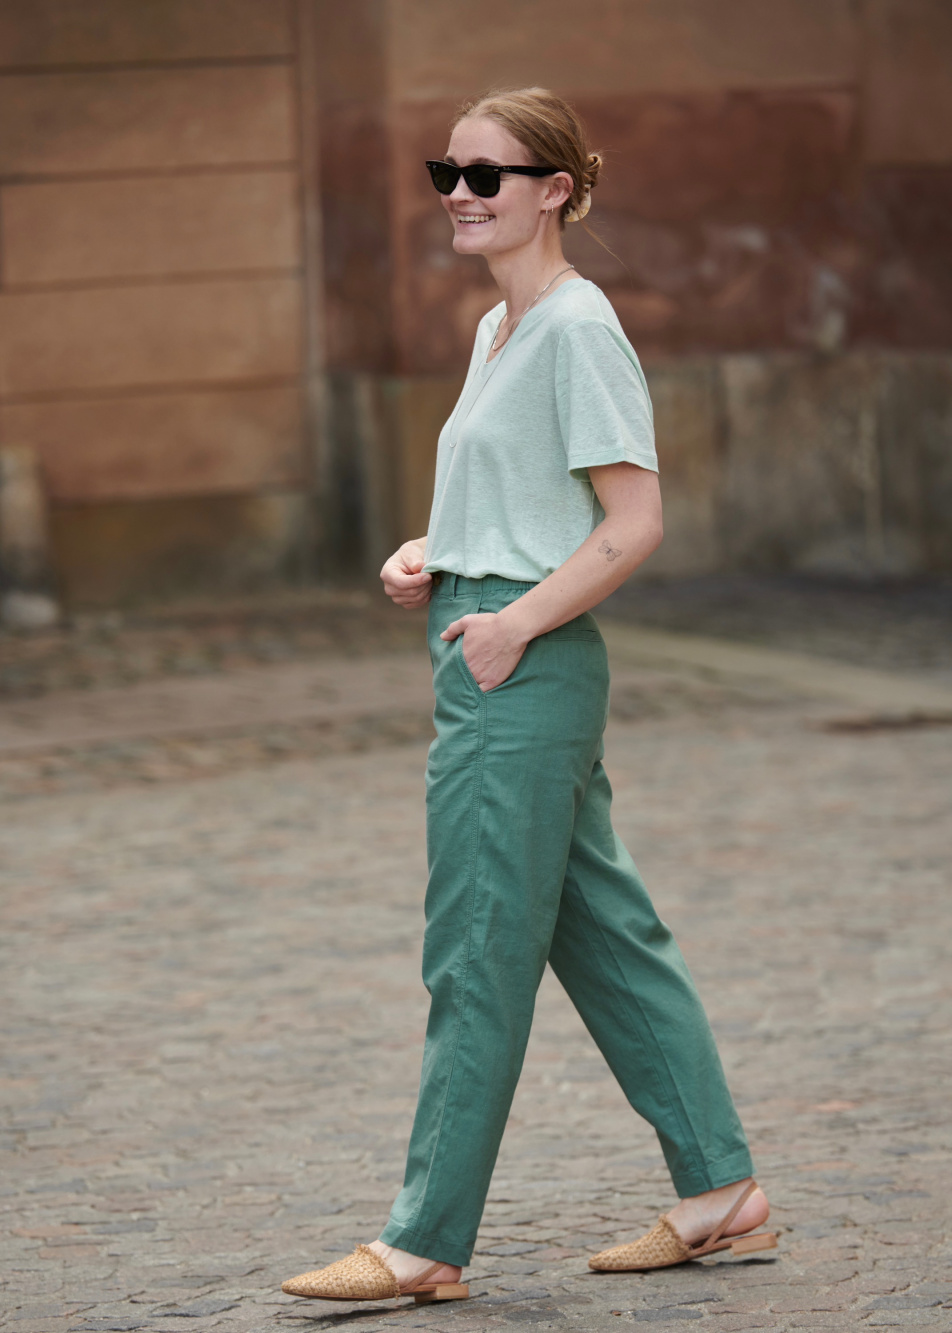 Linen Cotton Tapered Pants